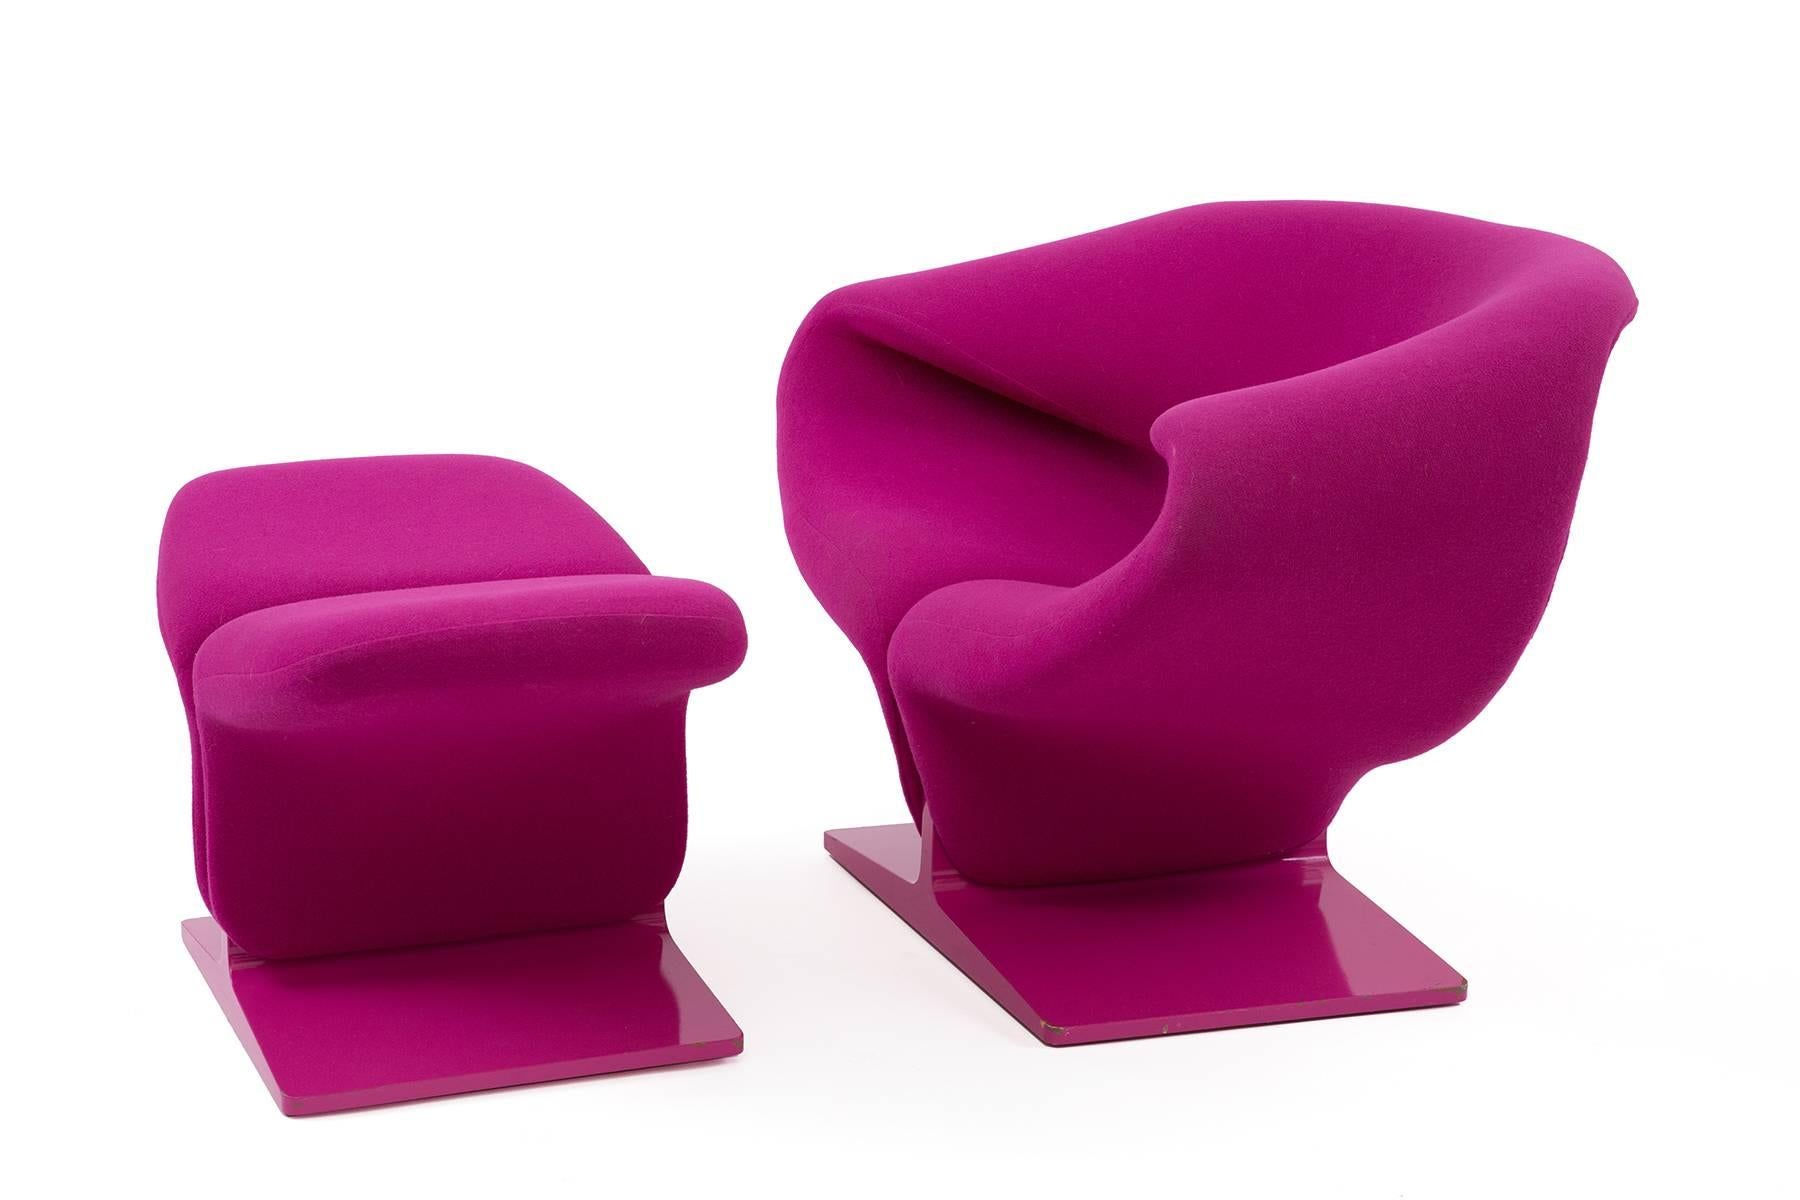 Pierre Paulin for Artifort ribbon chair and ottoman, circa late 1970s. These all original examples are upholstered in their original pink Maharam fabric and have pink lacquered bases to match. Price listed is for the chair and ottoman. Ottoman